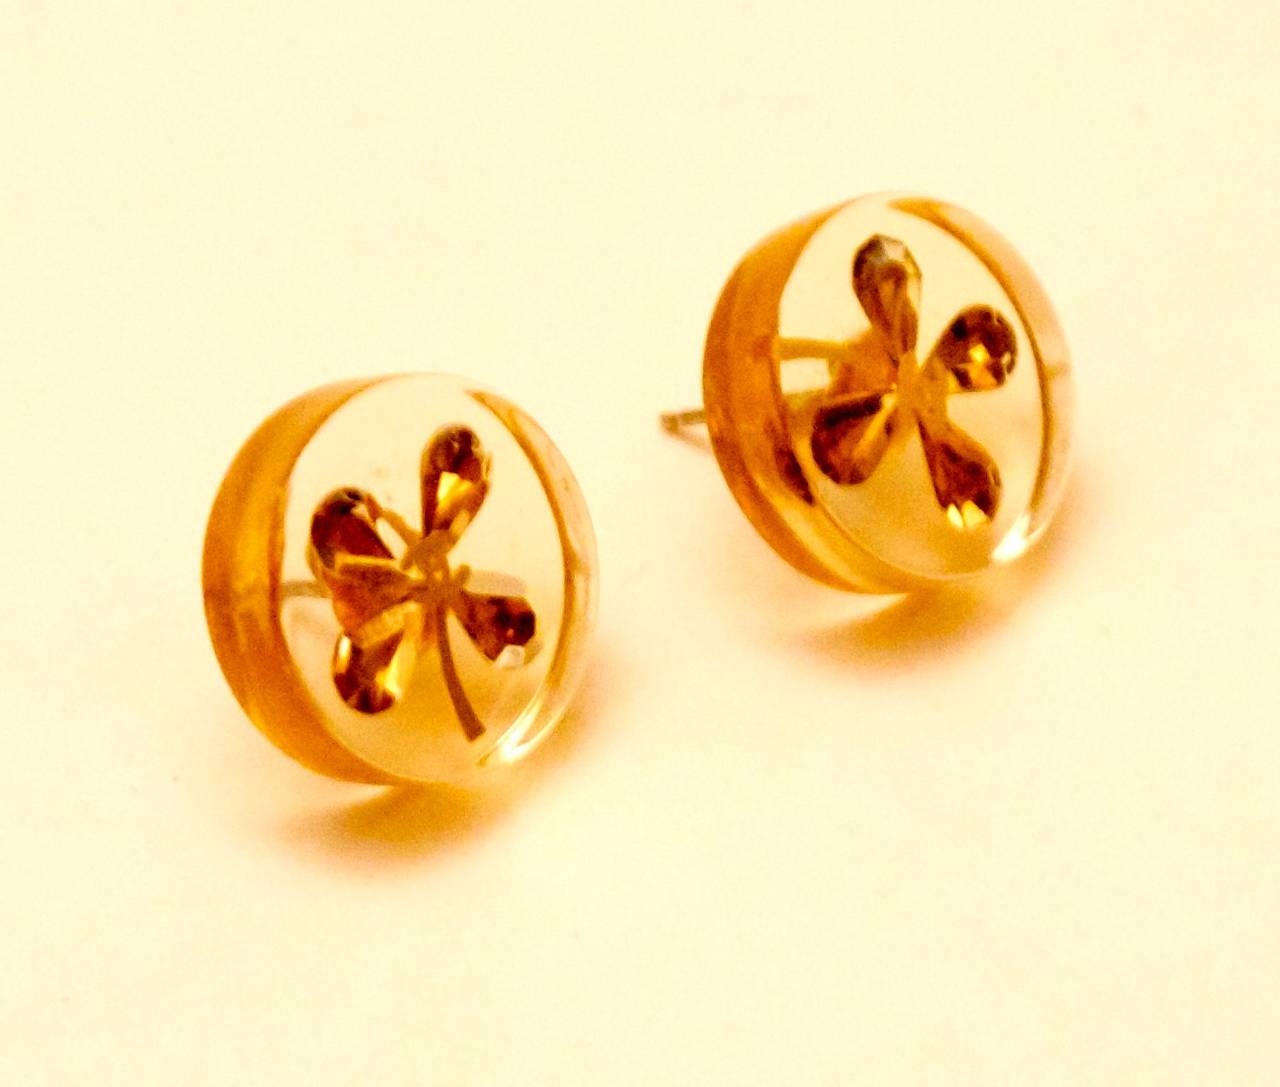 Vintage Chanel Clear Clover Charm Pierced Earrings from the 1980's. Remarkable pair of earrings that are in great condition for their age. They are a clear plastic with gold toned clovers on the inside. The actual earrings themselves are designed